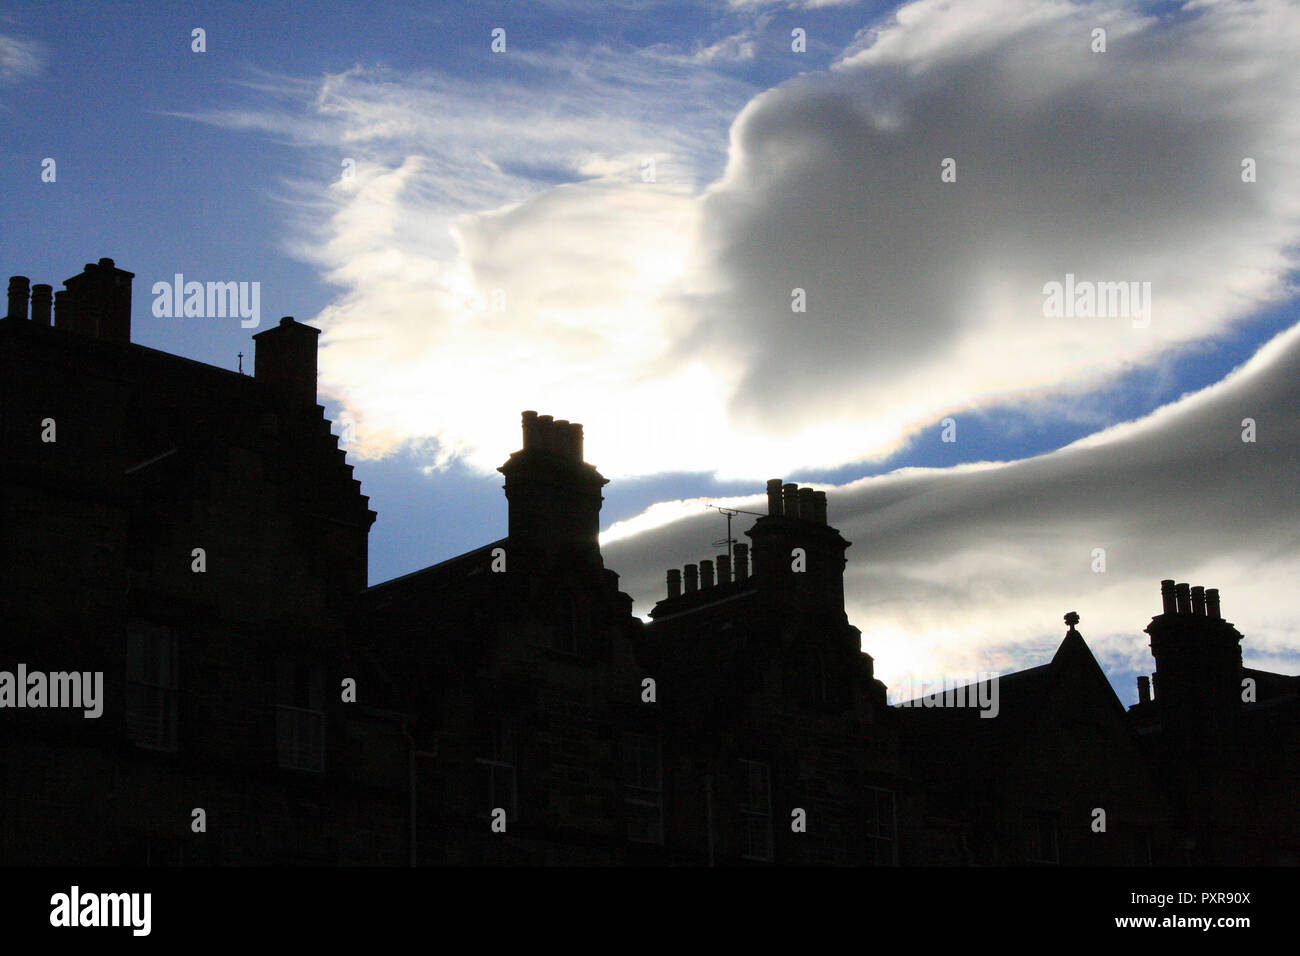 Chimney pipes silhouetted against a dramatic blue cloudy sky, Edinburgh, Scotland Stock Photo